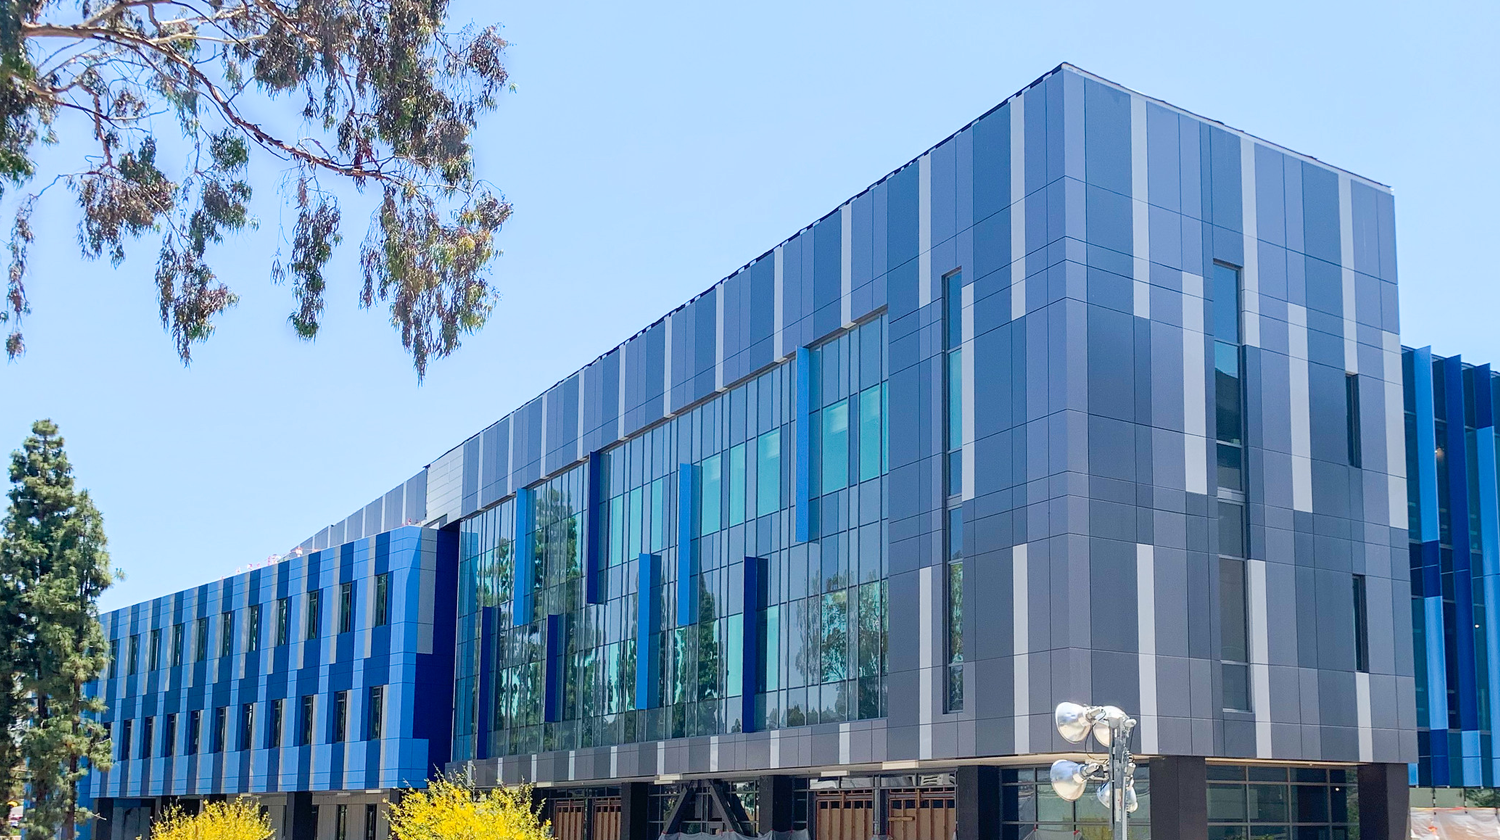 CSUDH's new Science and Innovation Building.